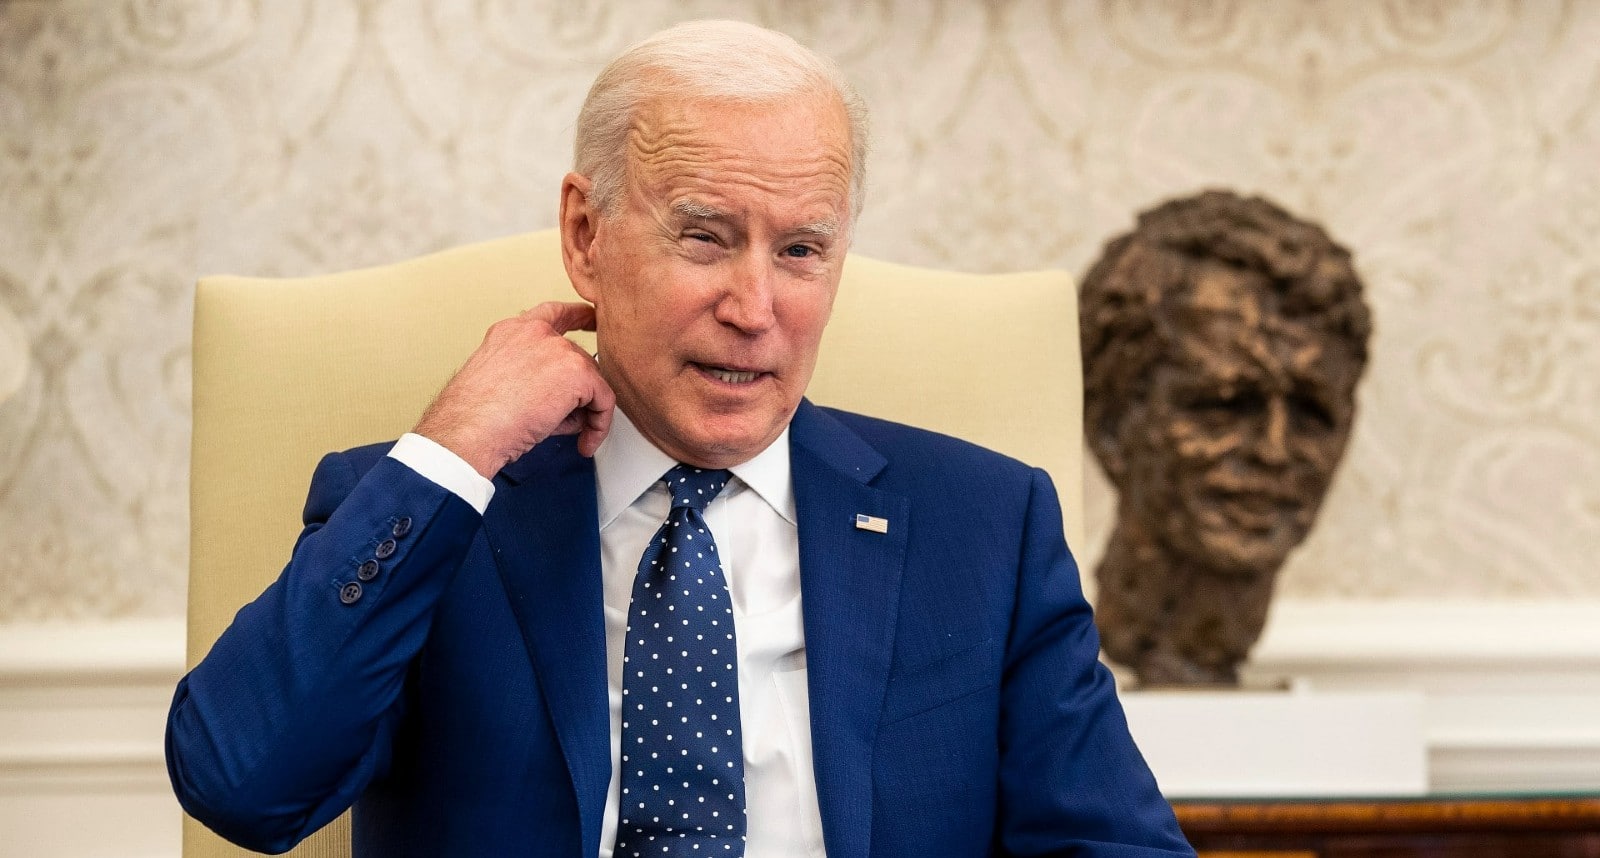 Camera Catches Another Embarrassing Moment For Biden – Trump News Today